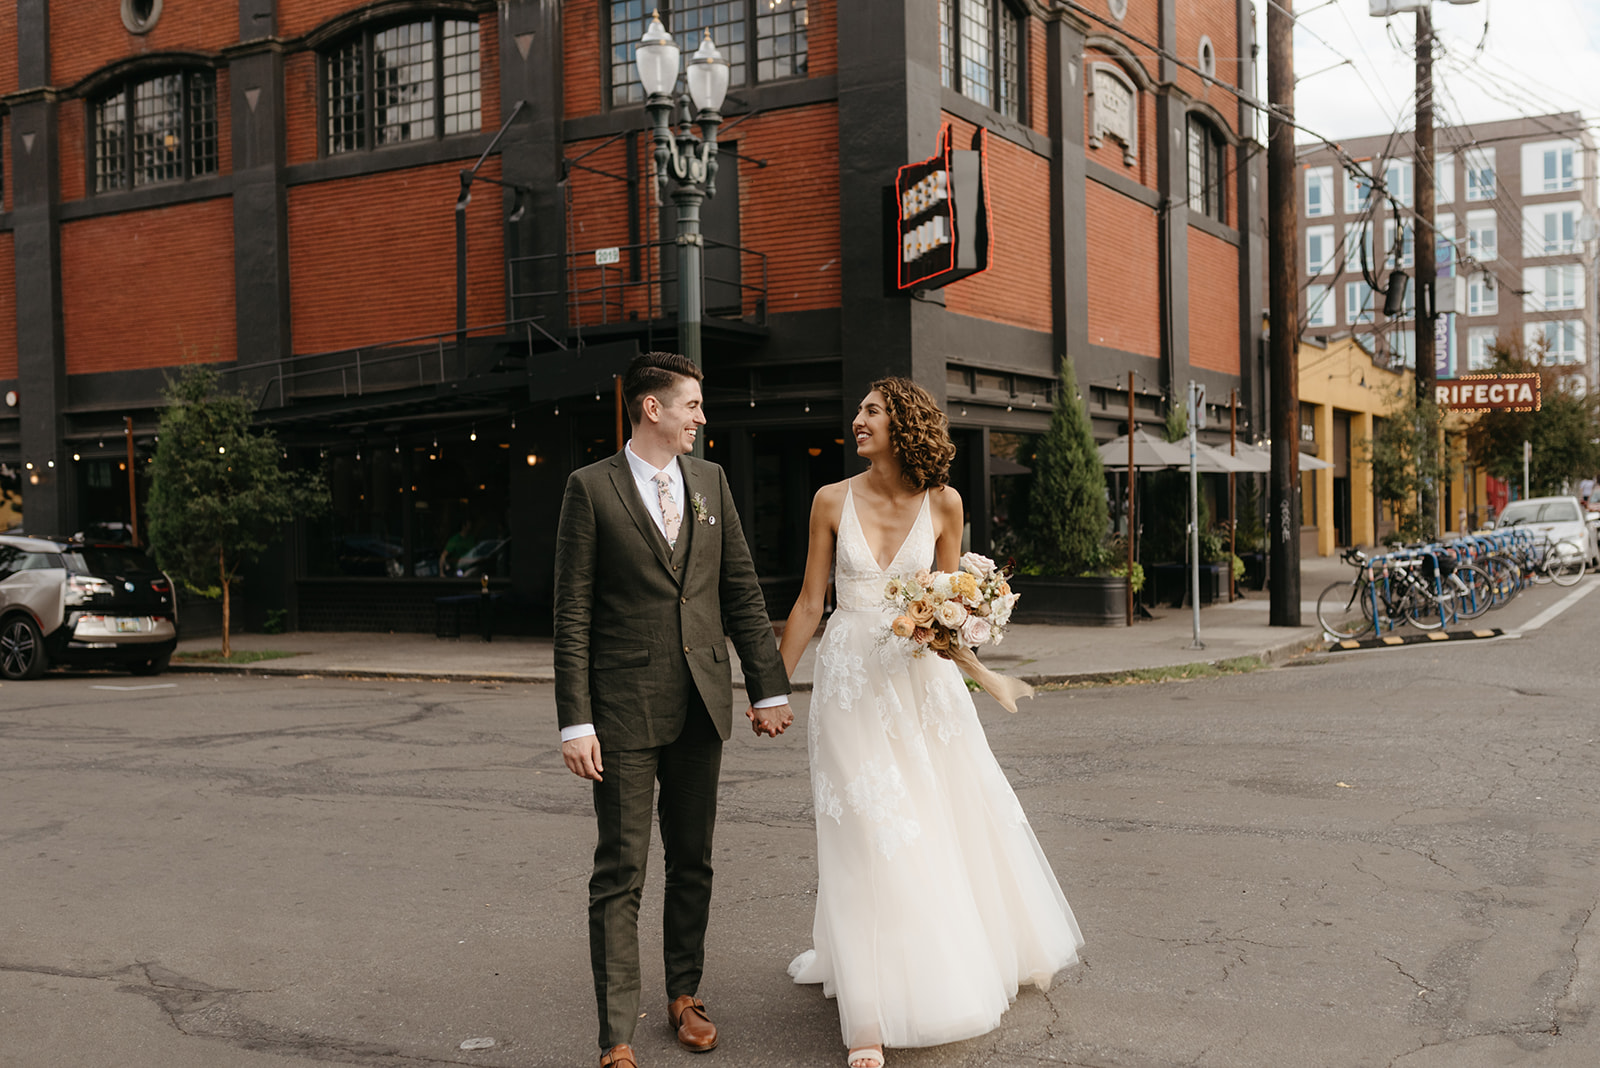 Bride and groom portrait on the street outside of wedding venue The Evergreen Portland